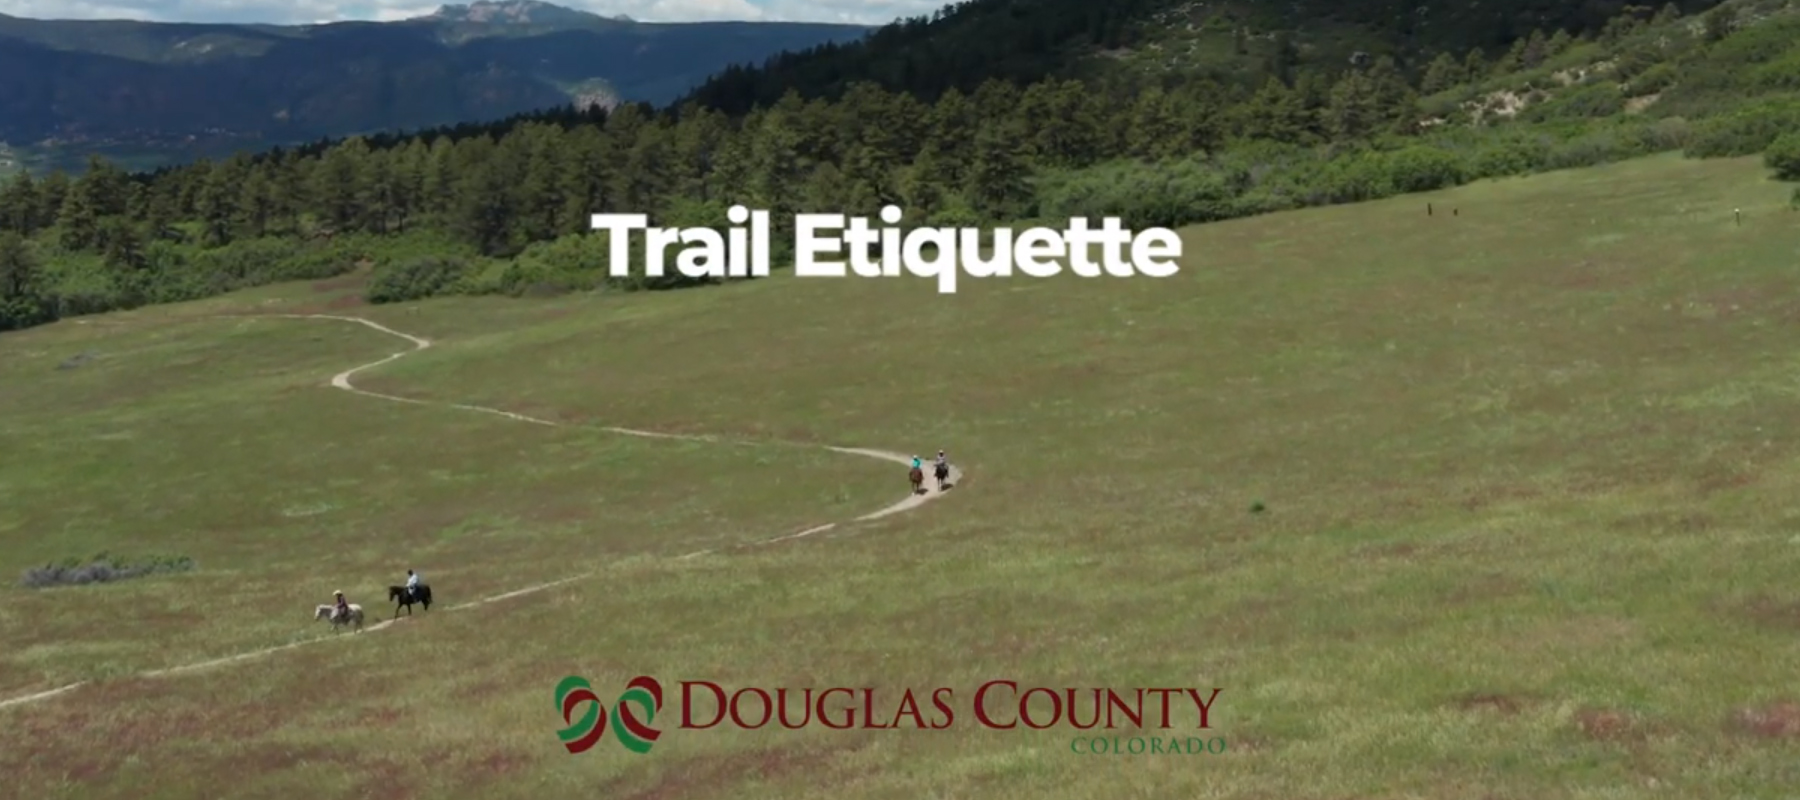 Trail etiquette tips every hiker, biker and equestrian needs to know